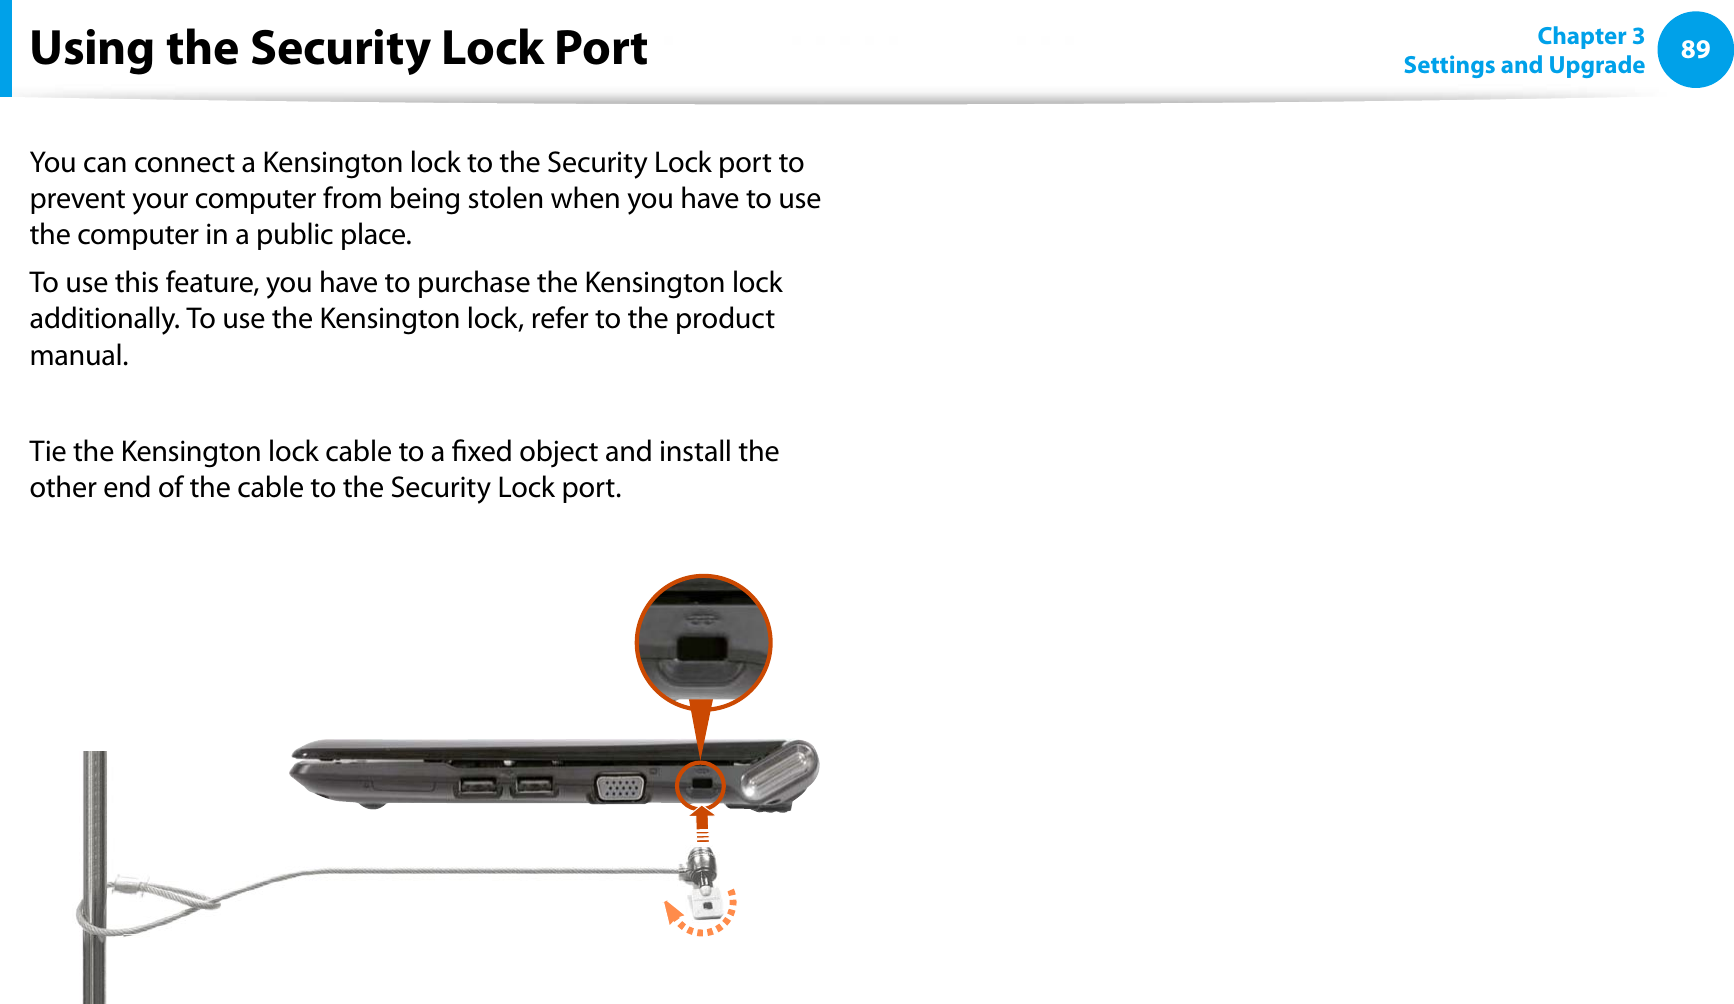 89Chapter 3Settings and UpgradeUsing the Security Lock PortYou can connect a Kensington lock to the Security Lock port to prevent your computer from being stolen when you have to use the computer in a public place.To use this feature, you have to purchase the Kensington lock additionally. To use the Kensington lock, refer to the product manual.Tie the Kensington lock cable to a xed object and install the other end of the cable to the Security Lock port.